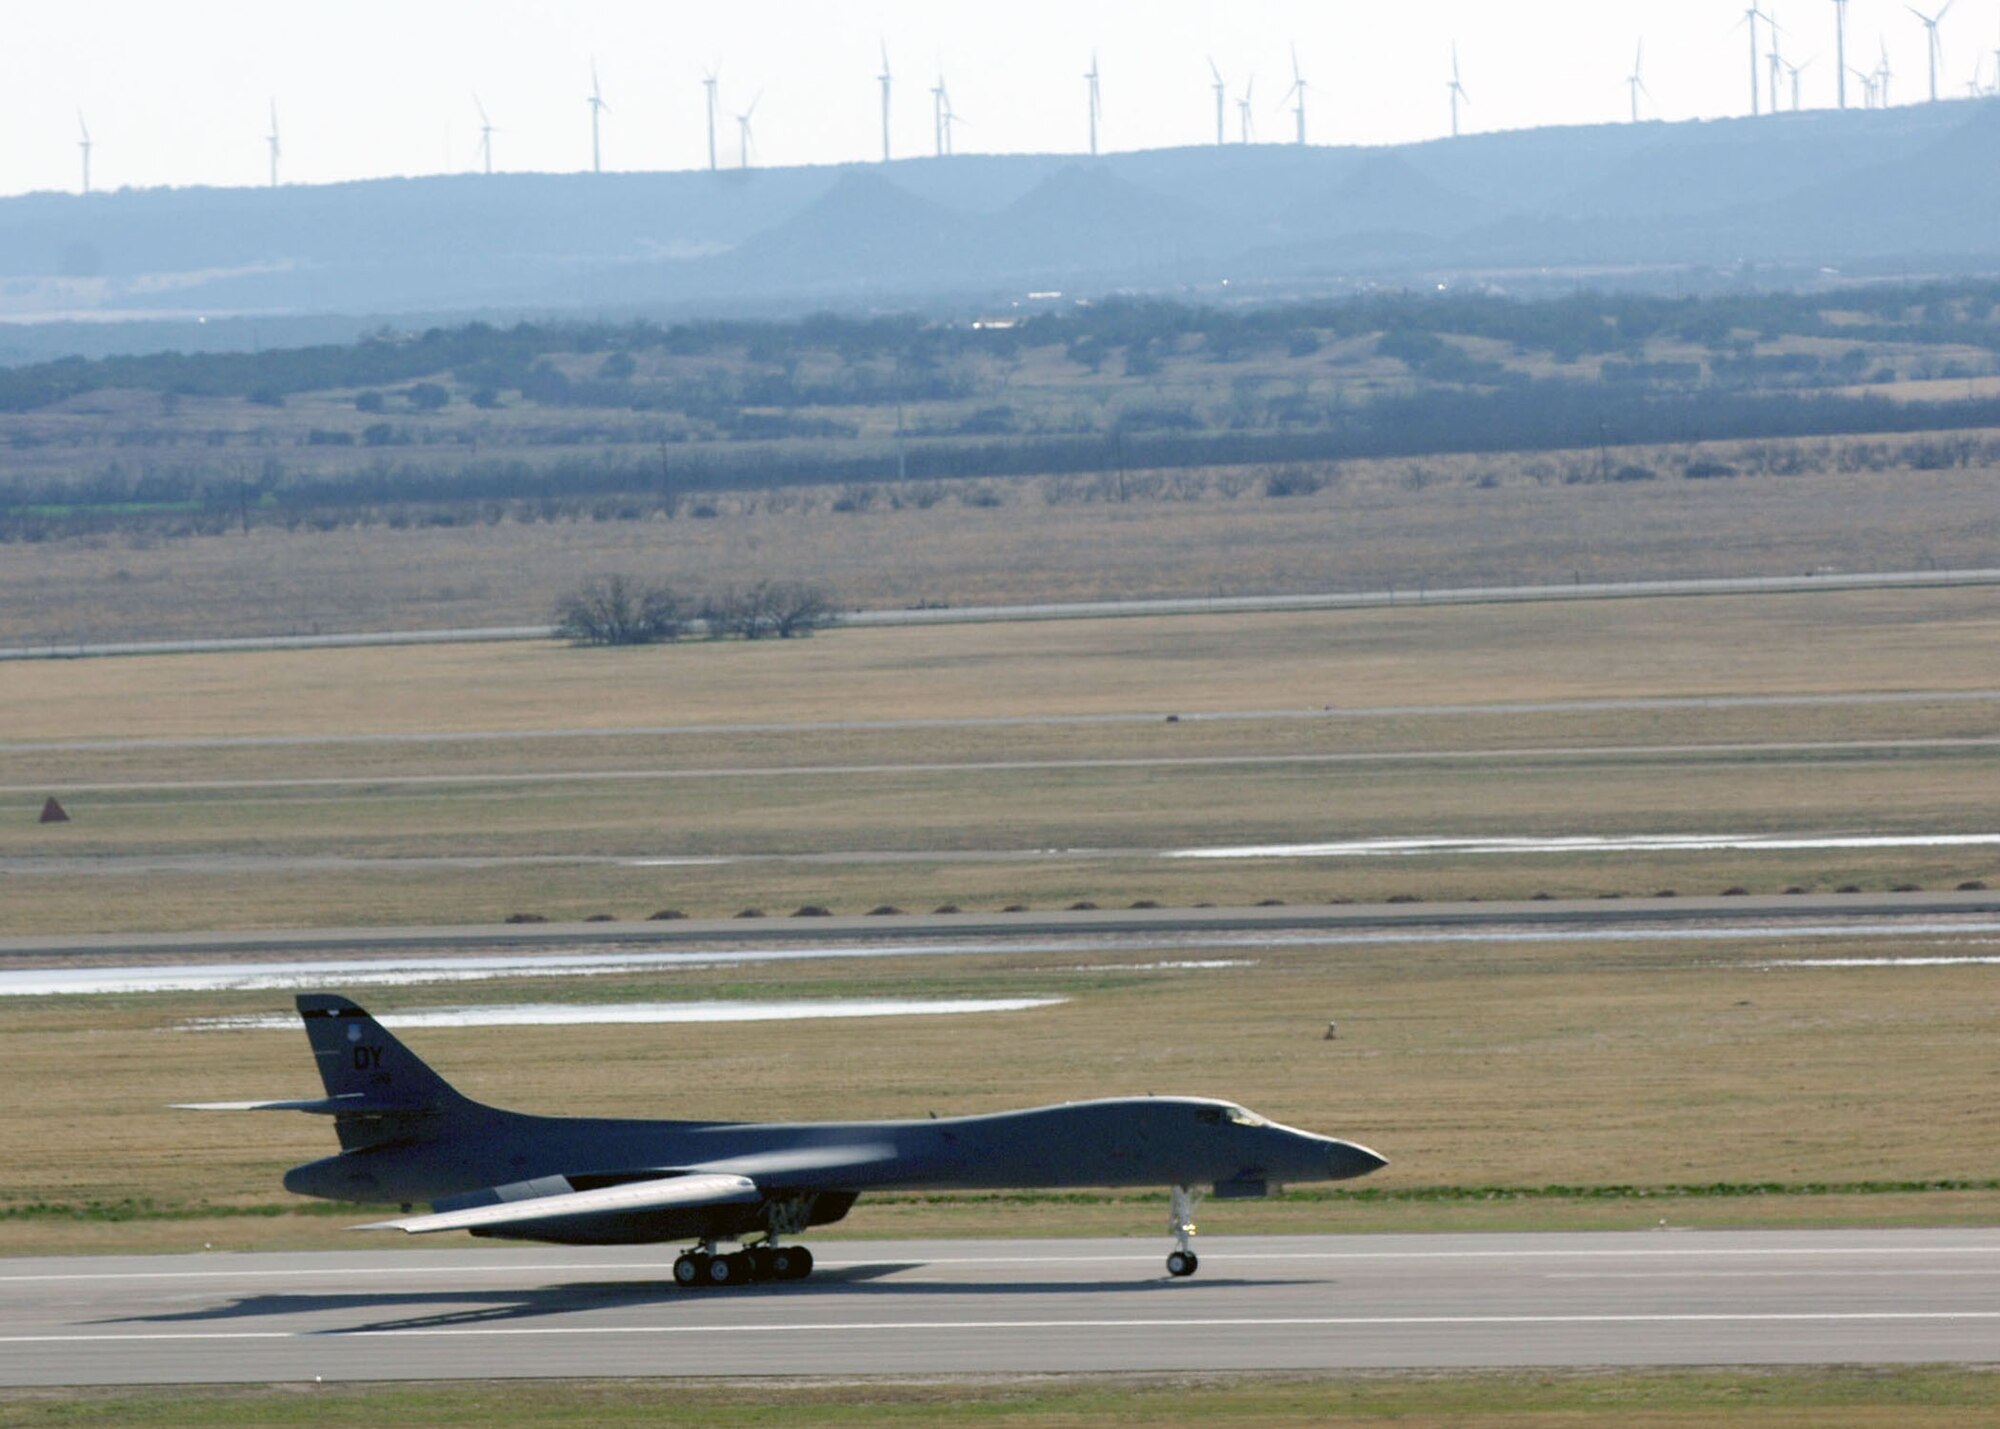 DYESS AIR FORCE BASE, TEXAS -- A 9th Bomb Squadron B-1 Bomber from Dyess Air Force Base coasts down the runway after the first supersonic flight using a 50/50 blend of synthetic and petroleum based fuel Mar 19. The flight marks a point in history for sythetic fuels. (U.S. Air Force Photo by Airman 1st Class Micheal Breaux)